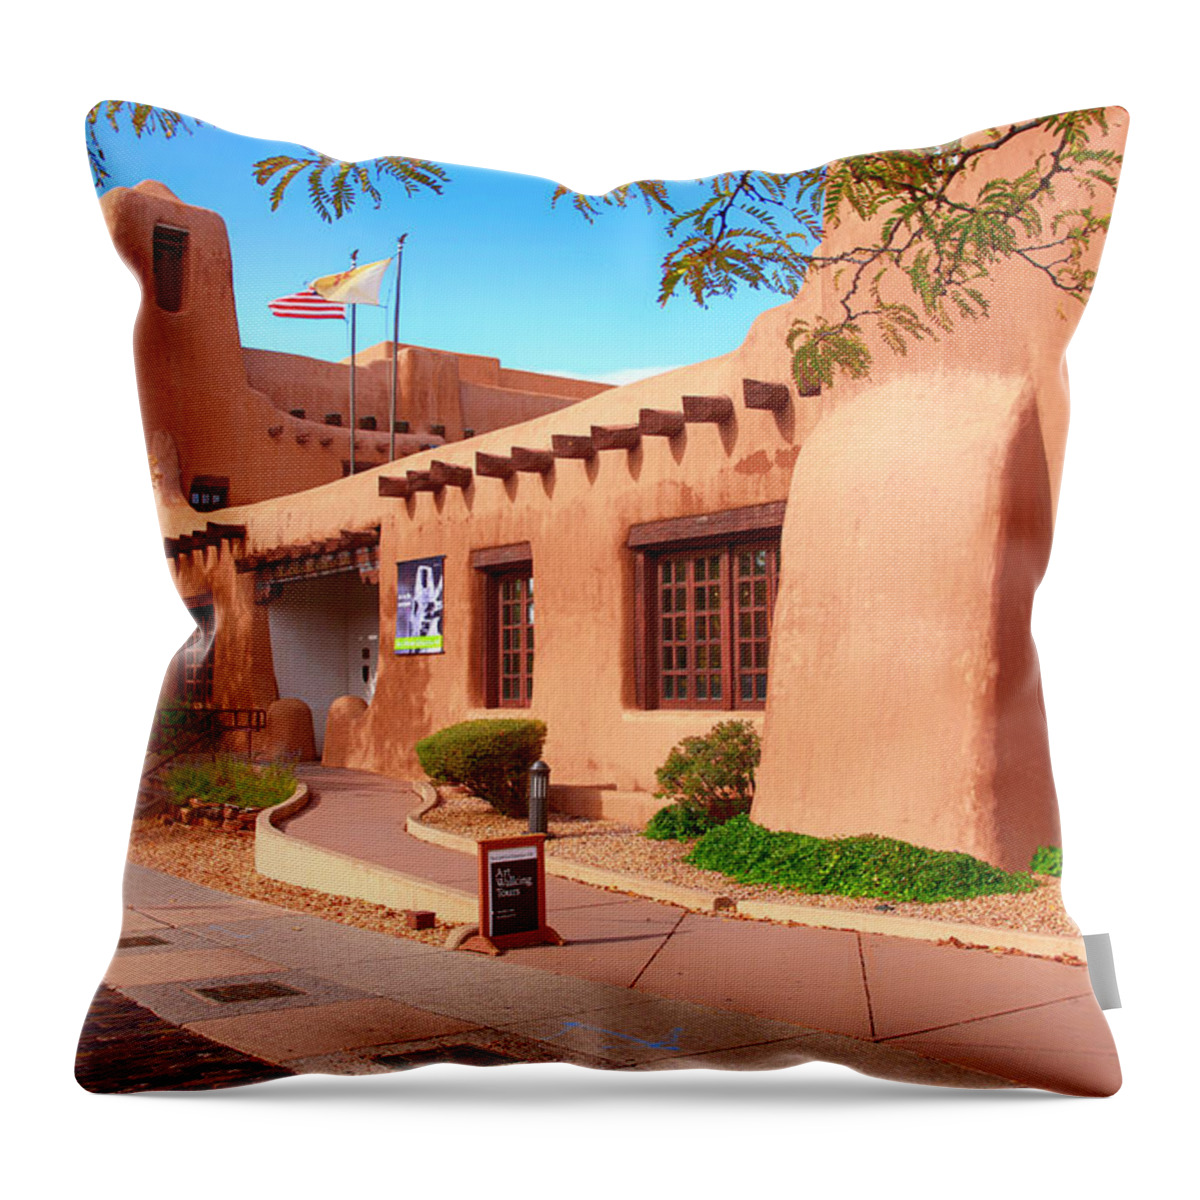 New Mexico Museum Of Art Throw Pillow featuring the photograph New Mexico Museum of Art by Chris Smith